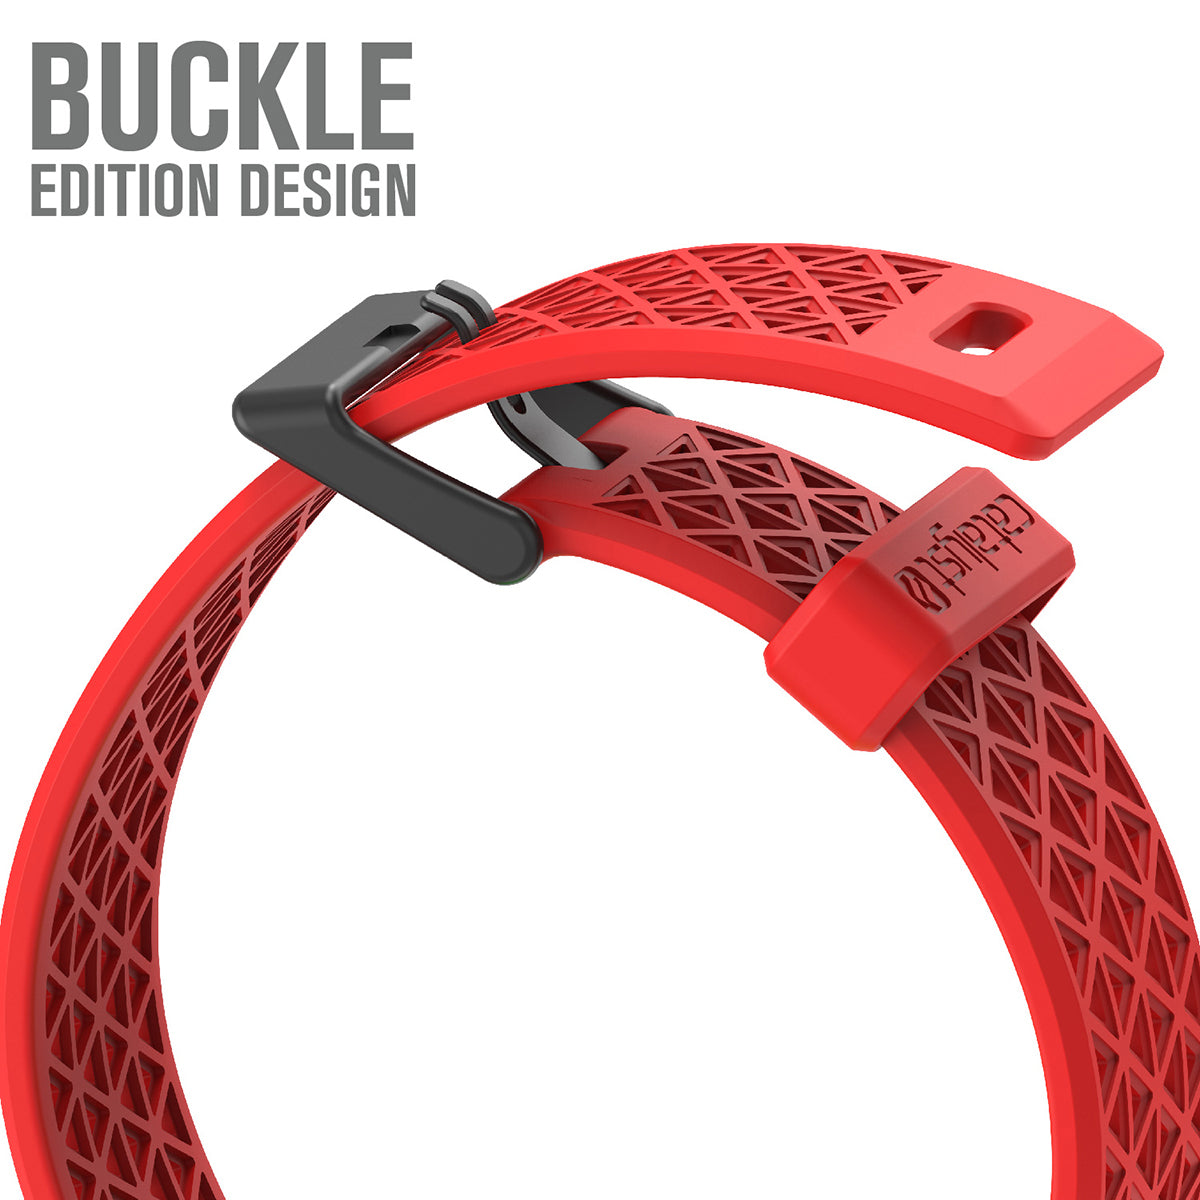 catalyst apple watch series 9 8 7 6 5 4 SE Gen 2 1 38 40 41mm sport band buckle edition showing the buckle edition design flame red text reads buckle edition design